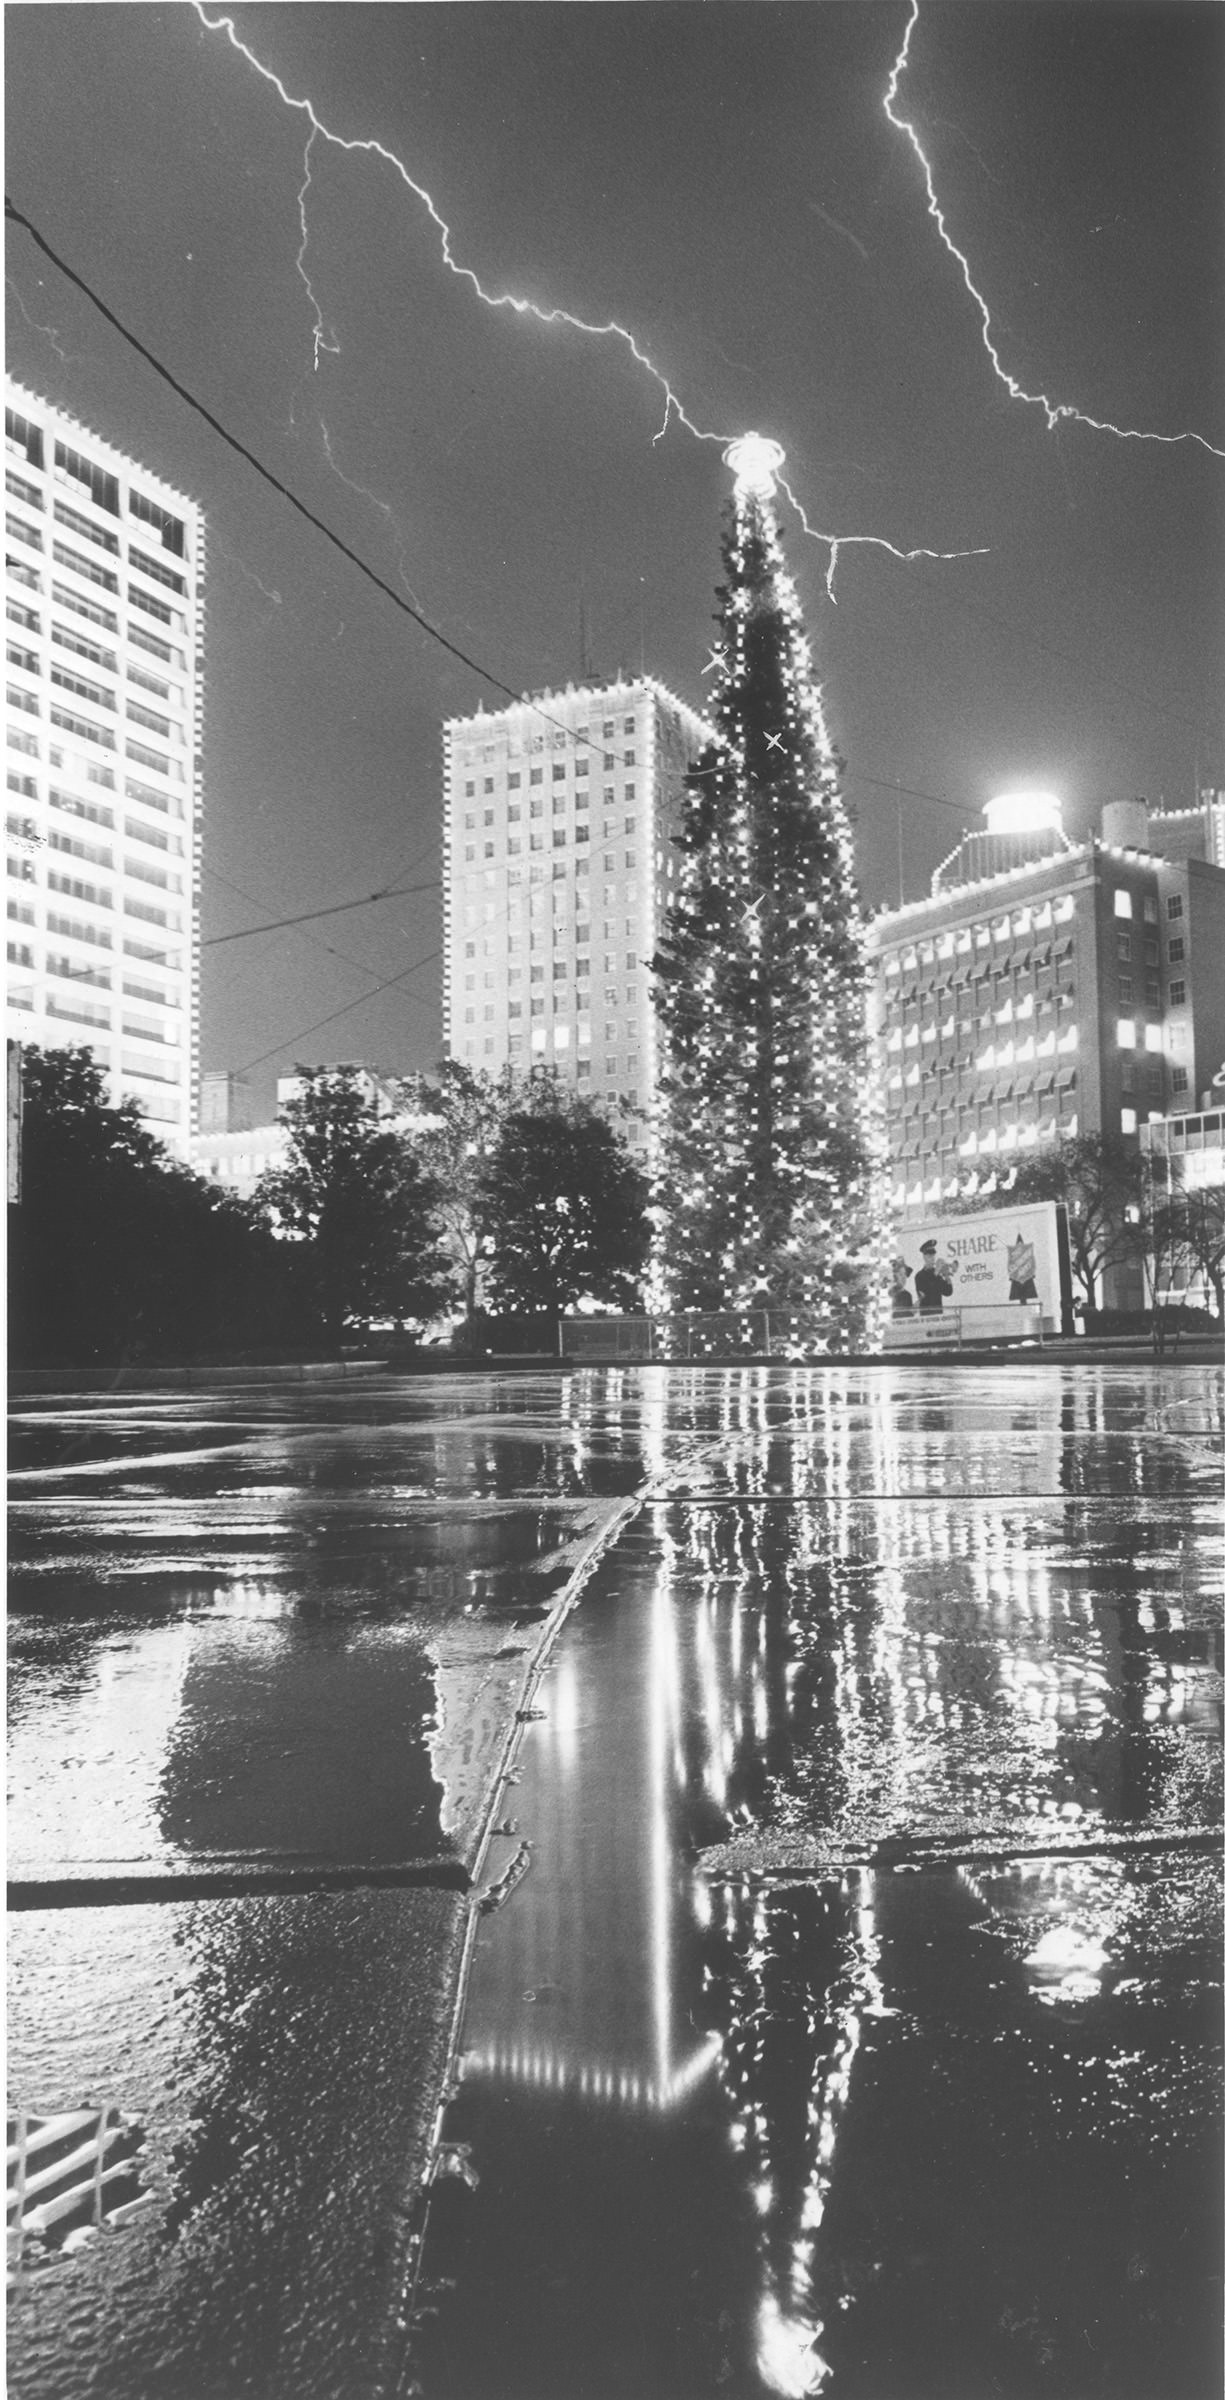 Burnett Park in Fort Worth with lightning flashes over the Christmas Tree, 1966